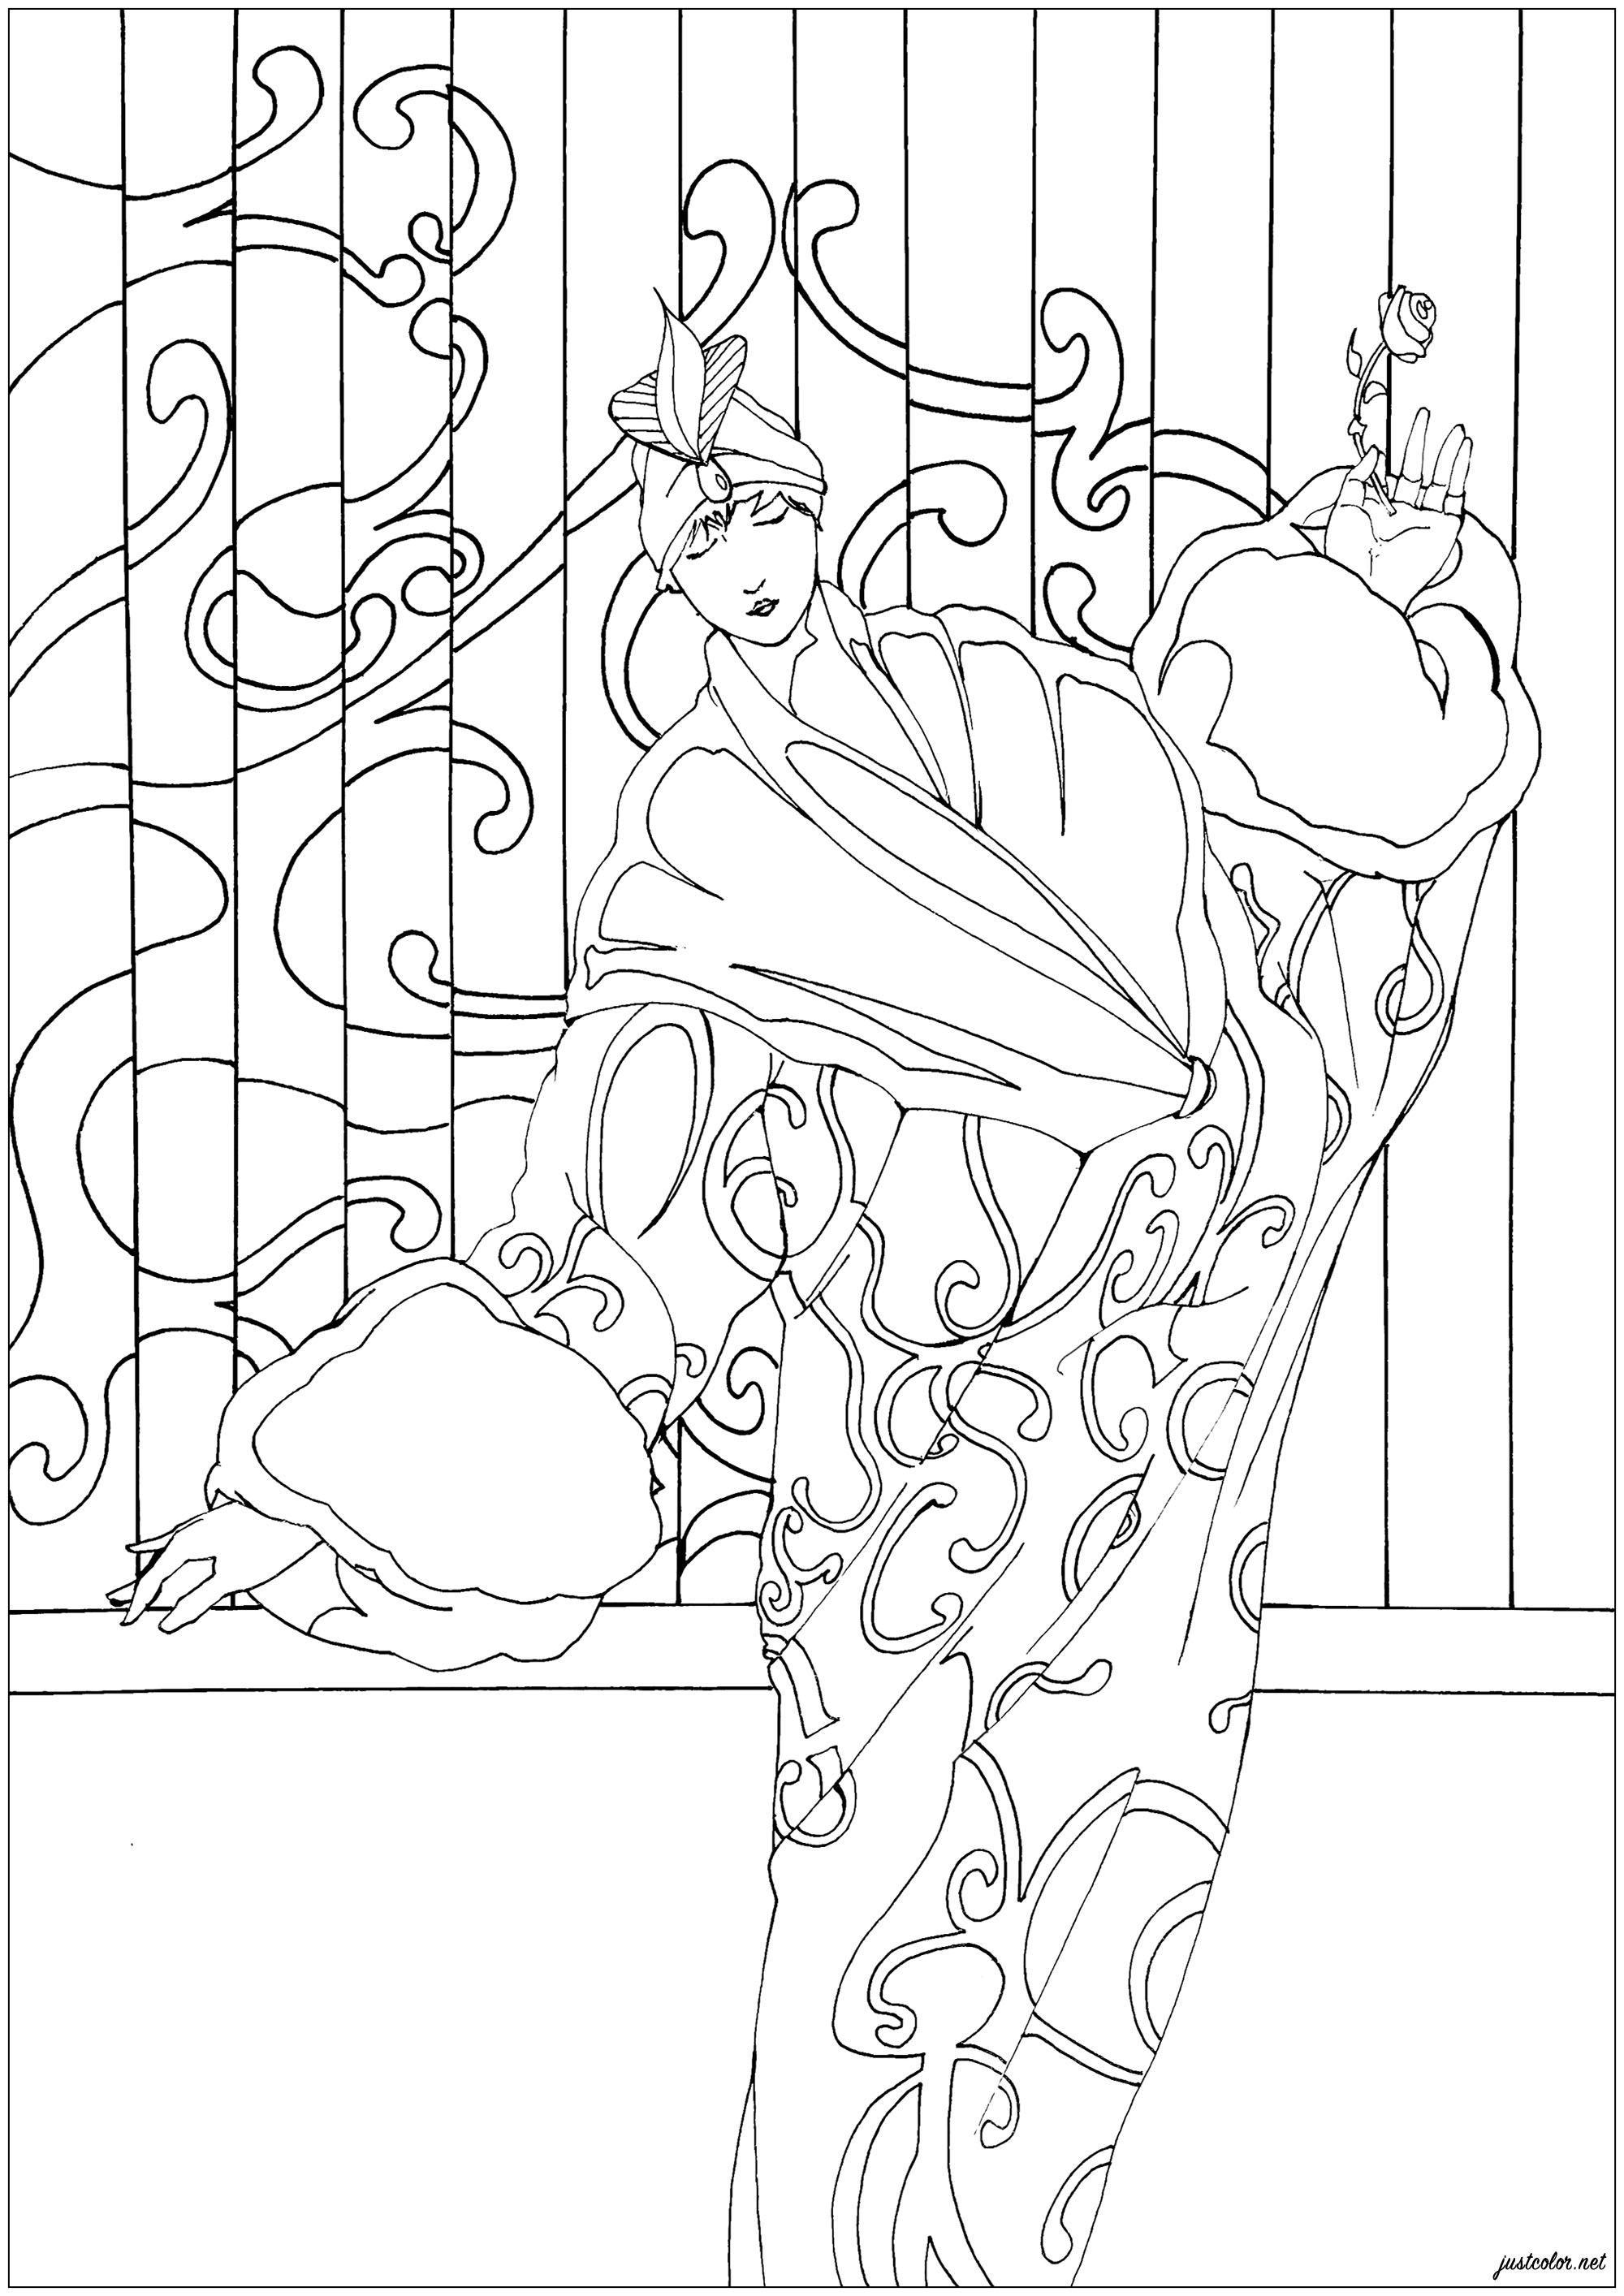 Coloring page inspired by an Art Nouveau illustration representing an elegantly dressed woman